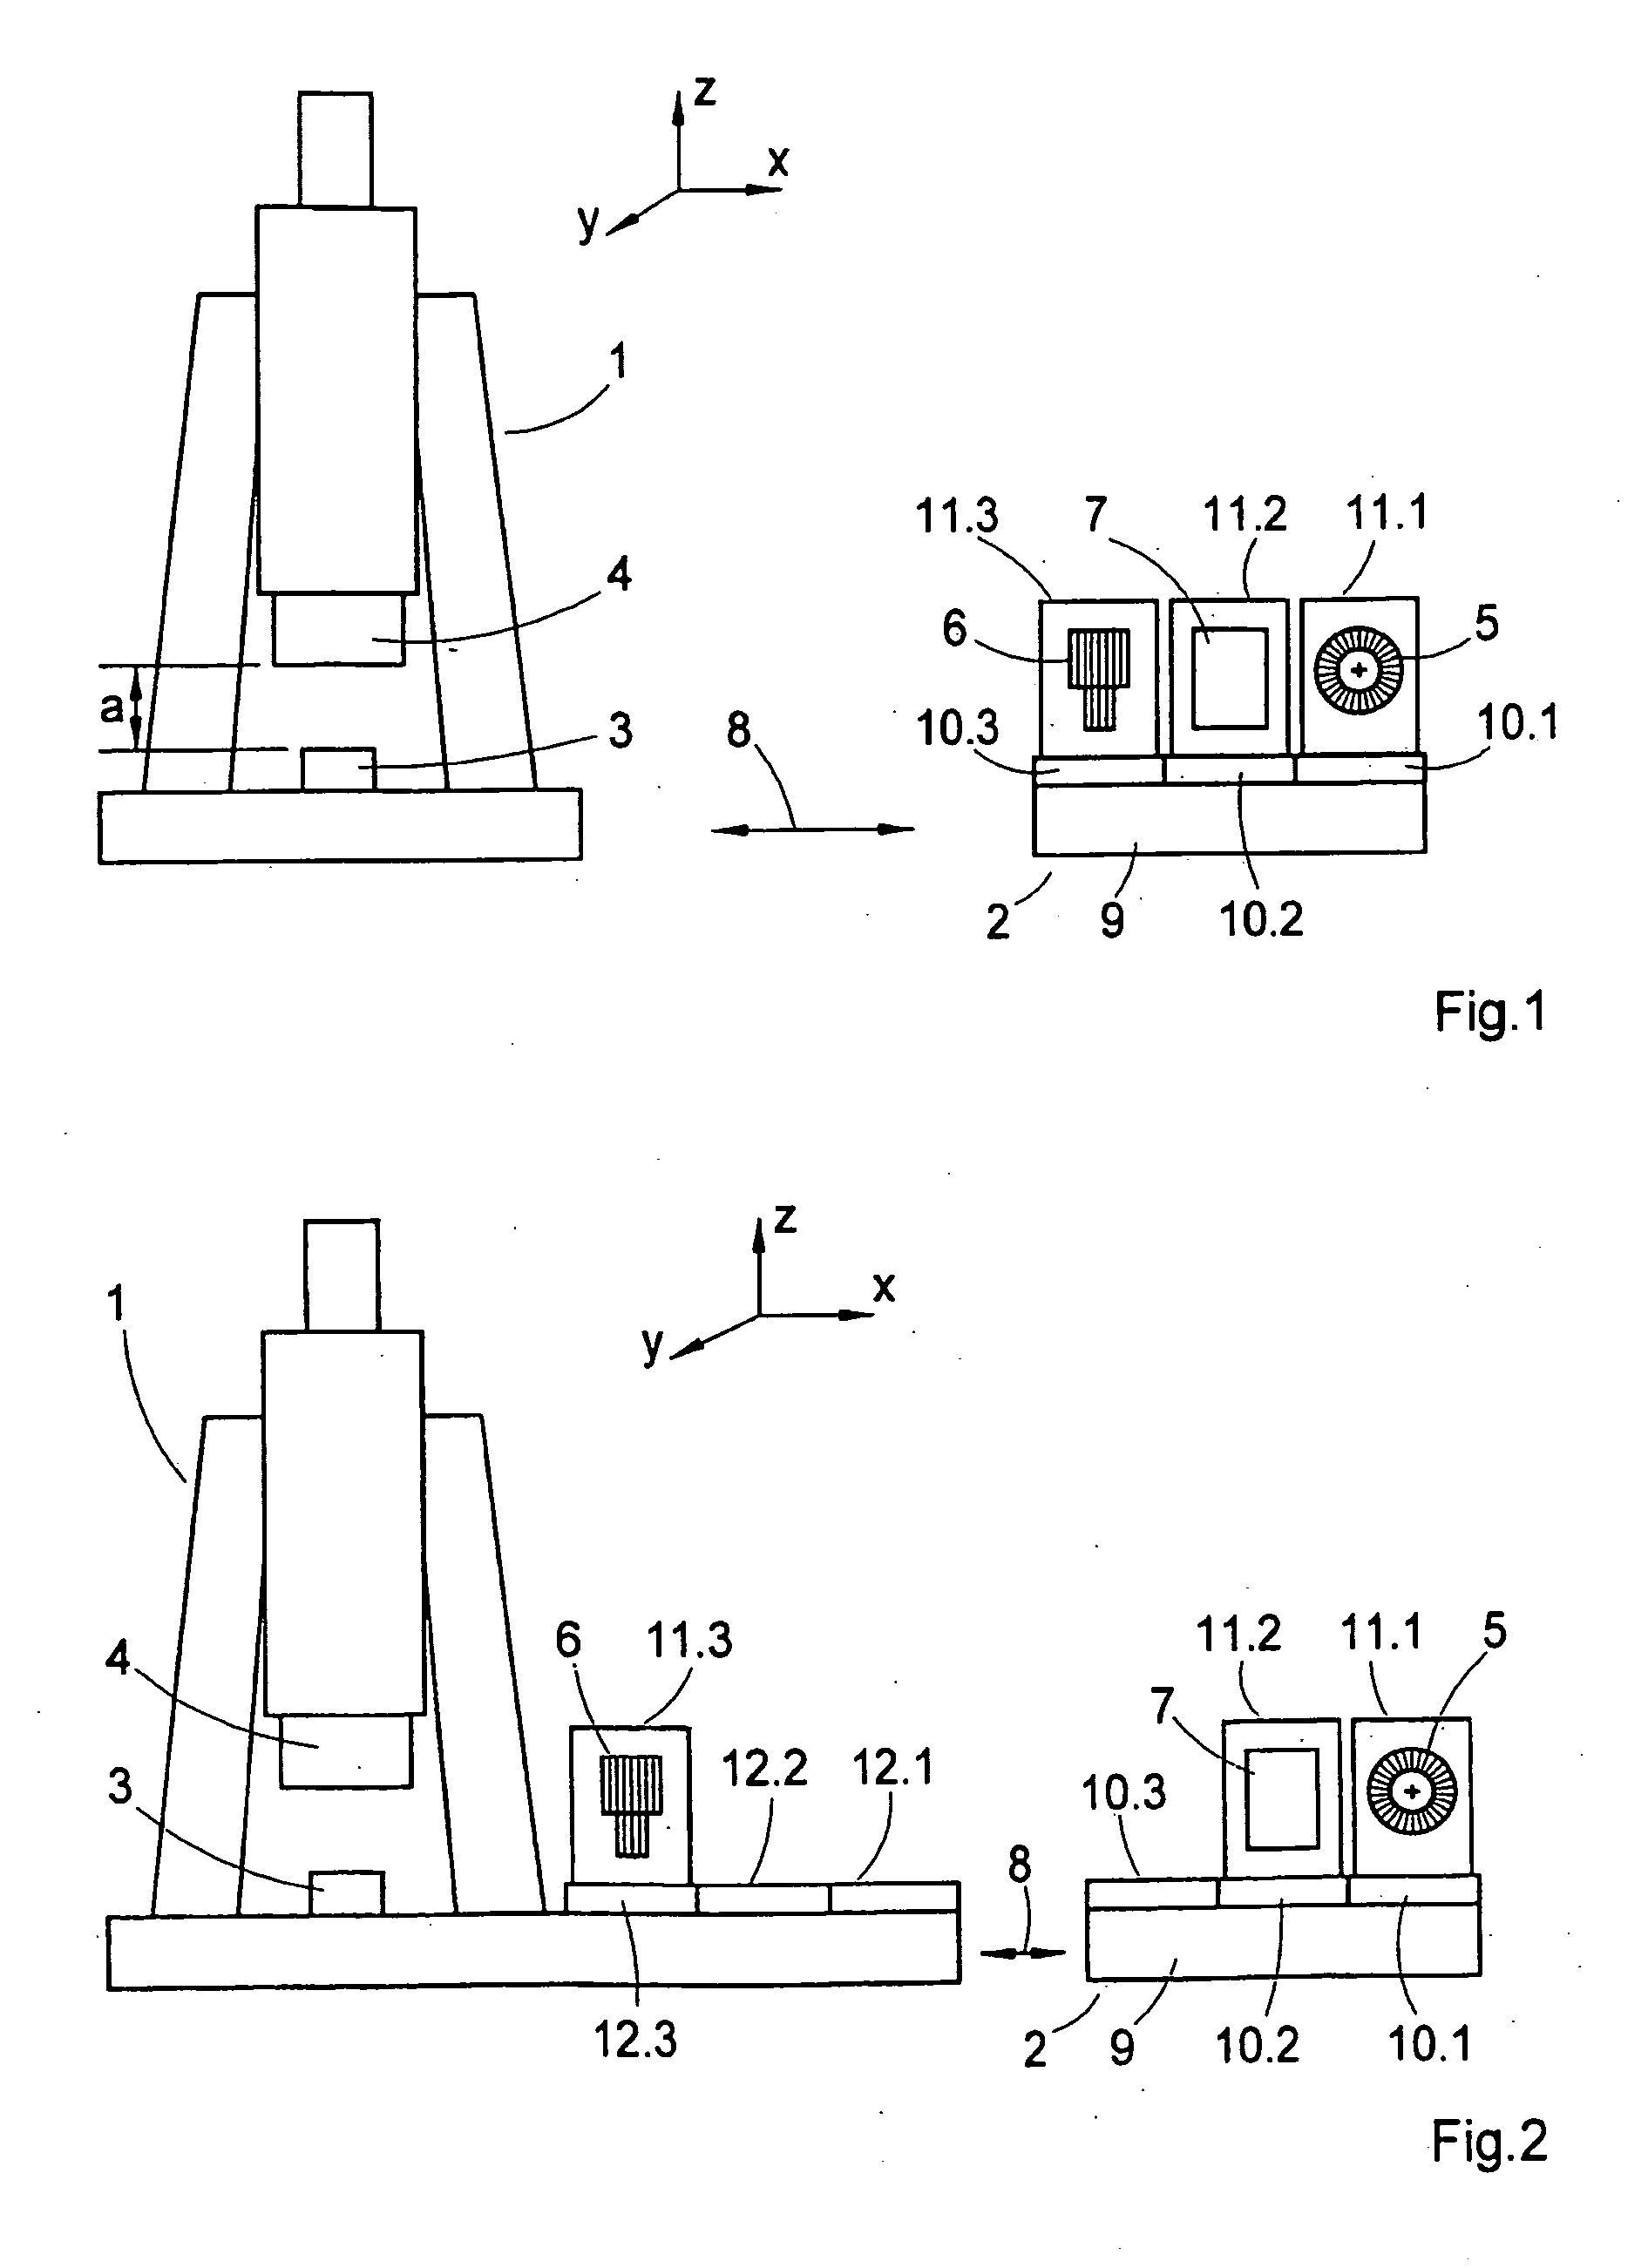 Operating unit for optical imaging devices